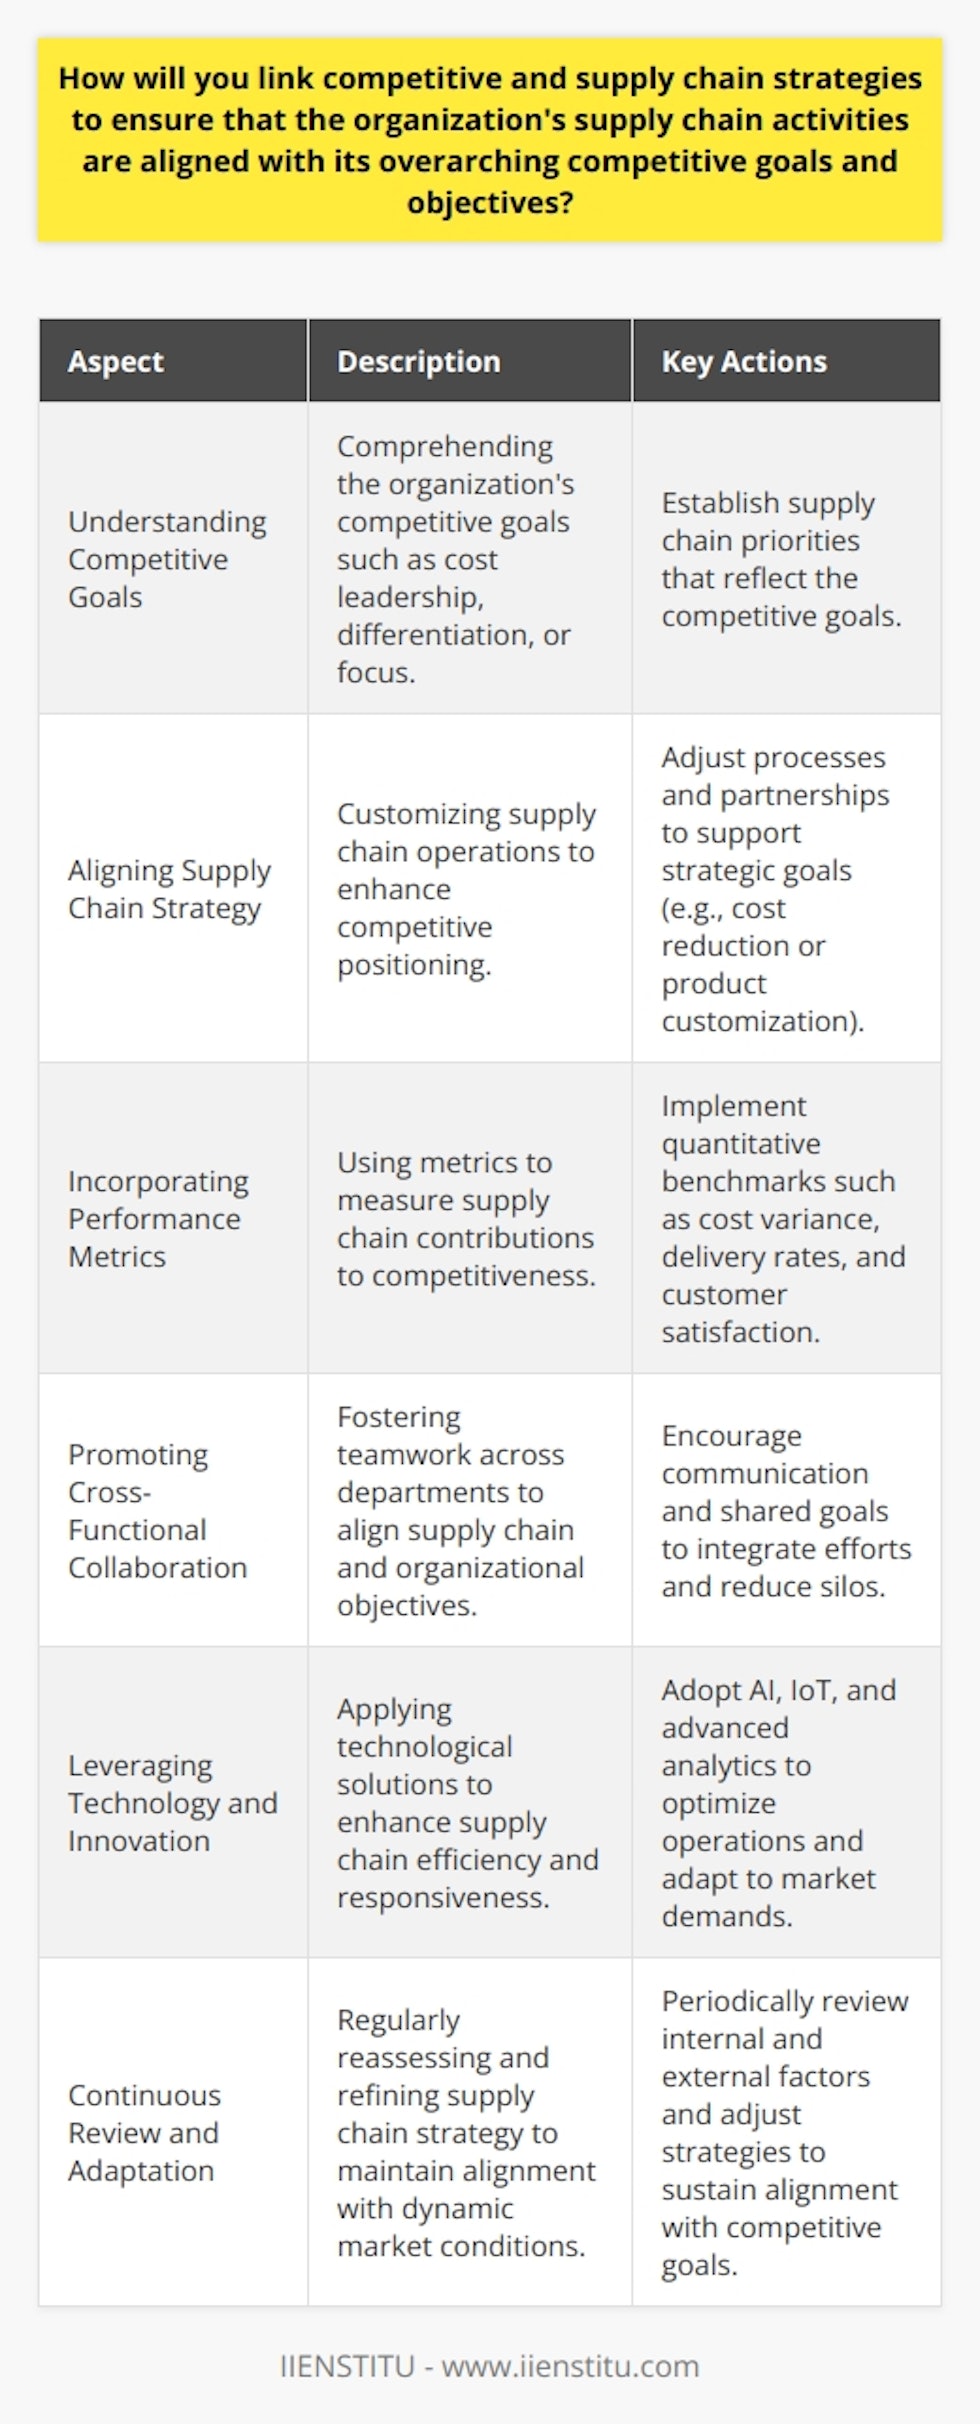 Linking competitive and supply chain strategies is critical to ensuring that an organization's operations support its overarching objectives, enabling it to maintain a strong position in the market. The alignment process is multifaceted, encompassing the understanding of competitive goals, integration of suitable performance metrics, fostering cross-functional collaboration, leveraging technology, and instituting a cycle of continuous review and adaptation.Understanding Competitive Goals and Objectives:The starting point in aligning supply chain activities with competitive goals is a thorough understanding of what these goals are. Competitive goals are often framed around achieving cost leadership, establishing a differentiated product or service offering, or focusing on a specific market segment. Clarity on these objectives informs which dimensions of supply chain performance need to be prioritized.Aligning Supply Chain Strategy with Competitive Goals:With a clear view of the competitive objectives, the supply chain strategy must be tailored to support these goals. For instance, if the aim is cost leadership, the supply chain strategy should focus on optimizing production processes, minimizing costs through economies of scale, and leveraging supplier relationships for cost-effective raw materials and services. In contrast, a differentiation strategy necessitates a supply chain that can support rapid innovation cycles, provide high-quality materials, and allow for customization to meet unique customer demands. For a focus strategy, the supply chain needs to be highly responsive and adaptable to the needs of a specific market niche.Incorporating Performance Metrics:Measuring performance is essential to ensure supply chain activities are contributing to competitive objectives. Useful metrics may include cost variance, on-time delivery rates, supply chain responsiveness, inventory turnover, and customer satisfaction scores. These metrics provide data-driven feedback and enable the fine-tuning of supply chain operations to better serve competitive aims.Promoting Cross-Functional Collaboration:Cross-functional teams play a pivotal role in aligning supply chain strategy with competitive goals. Through collaboration, teams can reconcile differing priorities, streamline workflow, and ensure that decisions made in one area of the company support the strategic objectives elsewhere. Regular communication and shared objectives help break down silos and create a unified effort towards the organization’s goals.Leveraging Technology and Innovation:Technological advancements are often the linchpin in effectively linking competitive and supply chain strategies. Whether it's through using AI for demand forecasting, IoT devices for tracking inventory, or advanced analytics for optimizing logistics routes, technology supports operational efficiency and strategic agility. Furthermore, technology can facilitate rapid scaling of operations to adjust to market changes and consumer demands.Continuous Review and Adaptation:The business environment is continually evolving, with changes in consumer preferences, emerging market trends, and shifts in the competitive landscape. To maintain alignment between supply chain and competitive strategies, organizations must adopt a stance of continuous improvement. This entails ongoing monitoring of internal performance and external conditions and adjusting the supply chain strategy accordingly to ensure it remains conducive to meeting competitive goals.In essence, aligning your supply chain strategy with competitive goals is a dynamic and systematic process that spirals towards sustaining a market edge. Emphasizing a balance between operational excellence and strategic foresight, organizations can achieve a harmonious integration of supply chain operations with their competition-oriented objectives, propelling the business forward amidst a complex and fast-paced market.